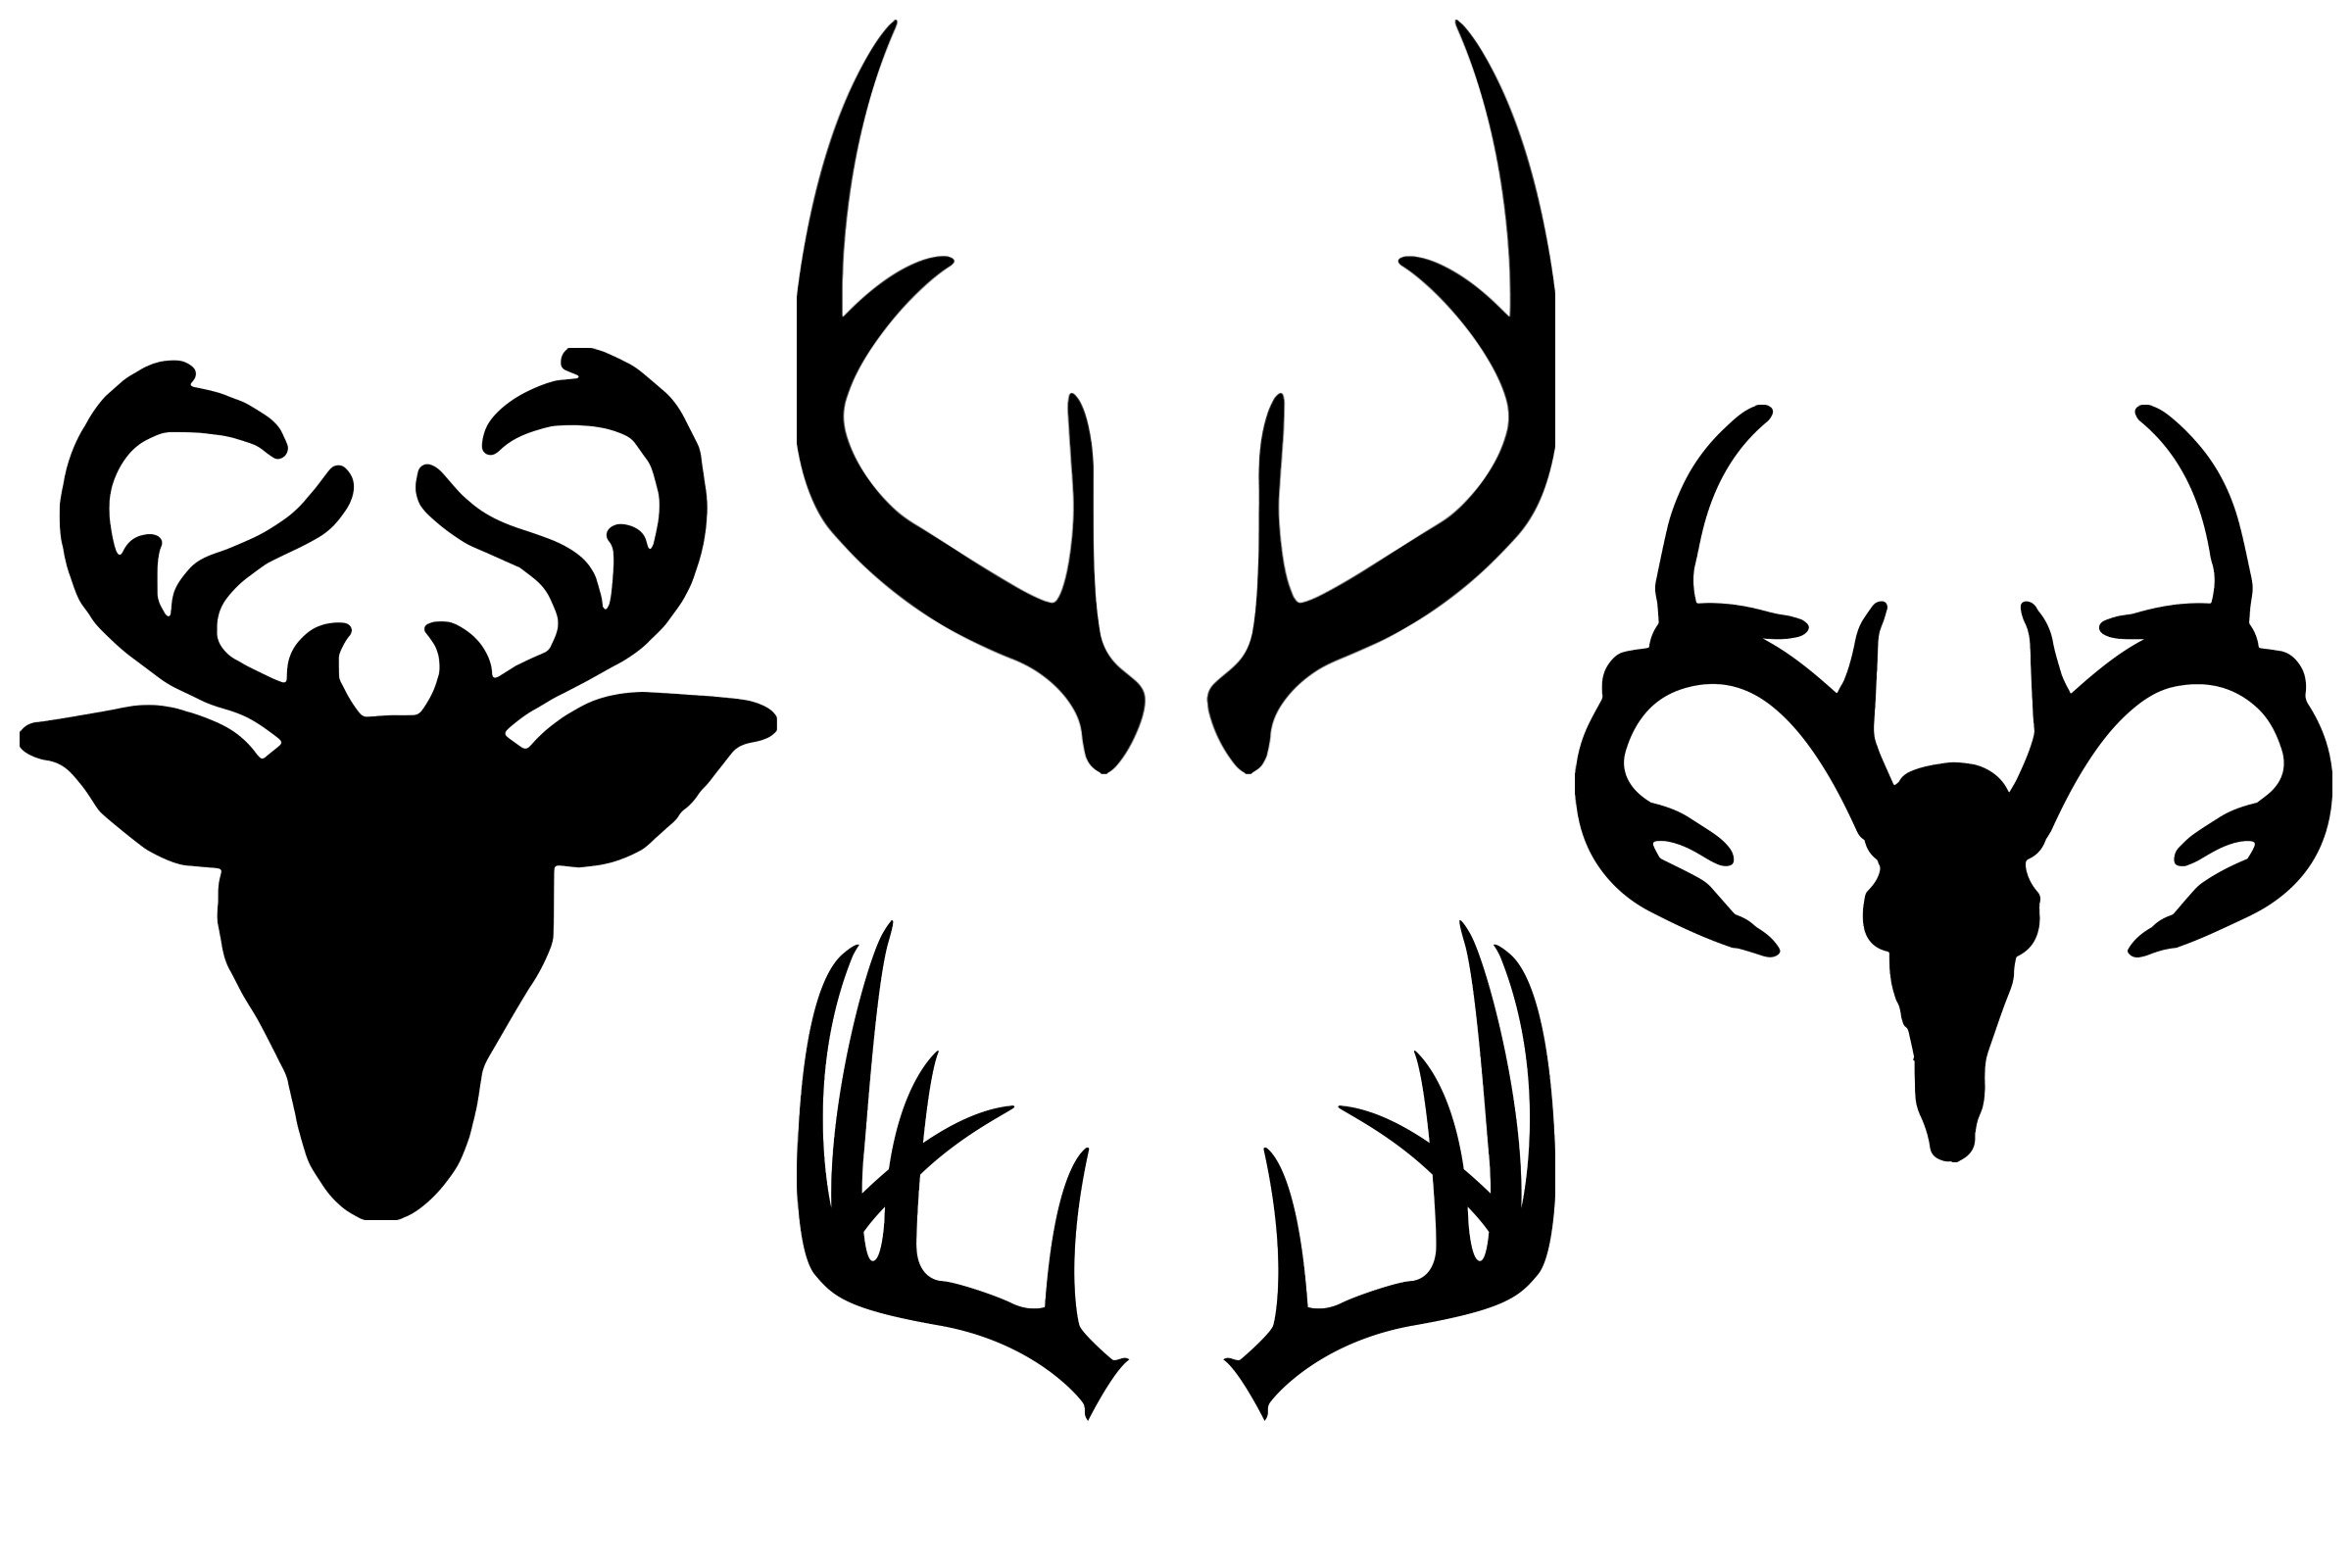 Simple and classic deer antlers.